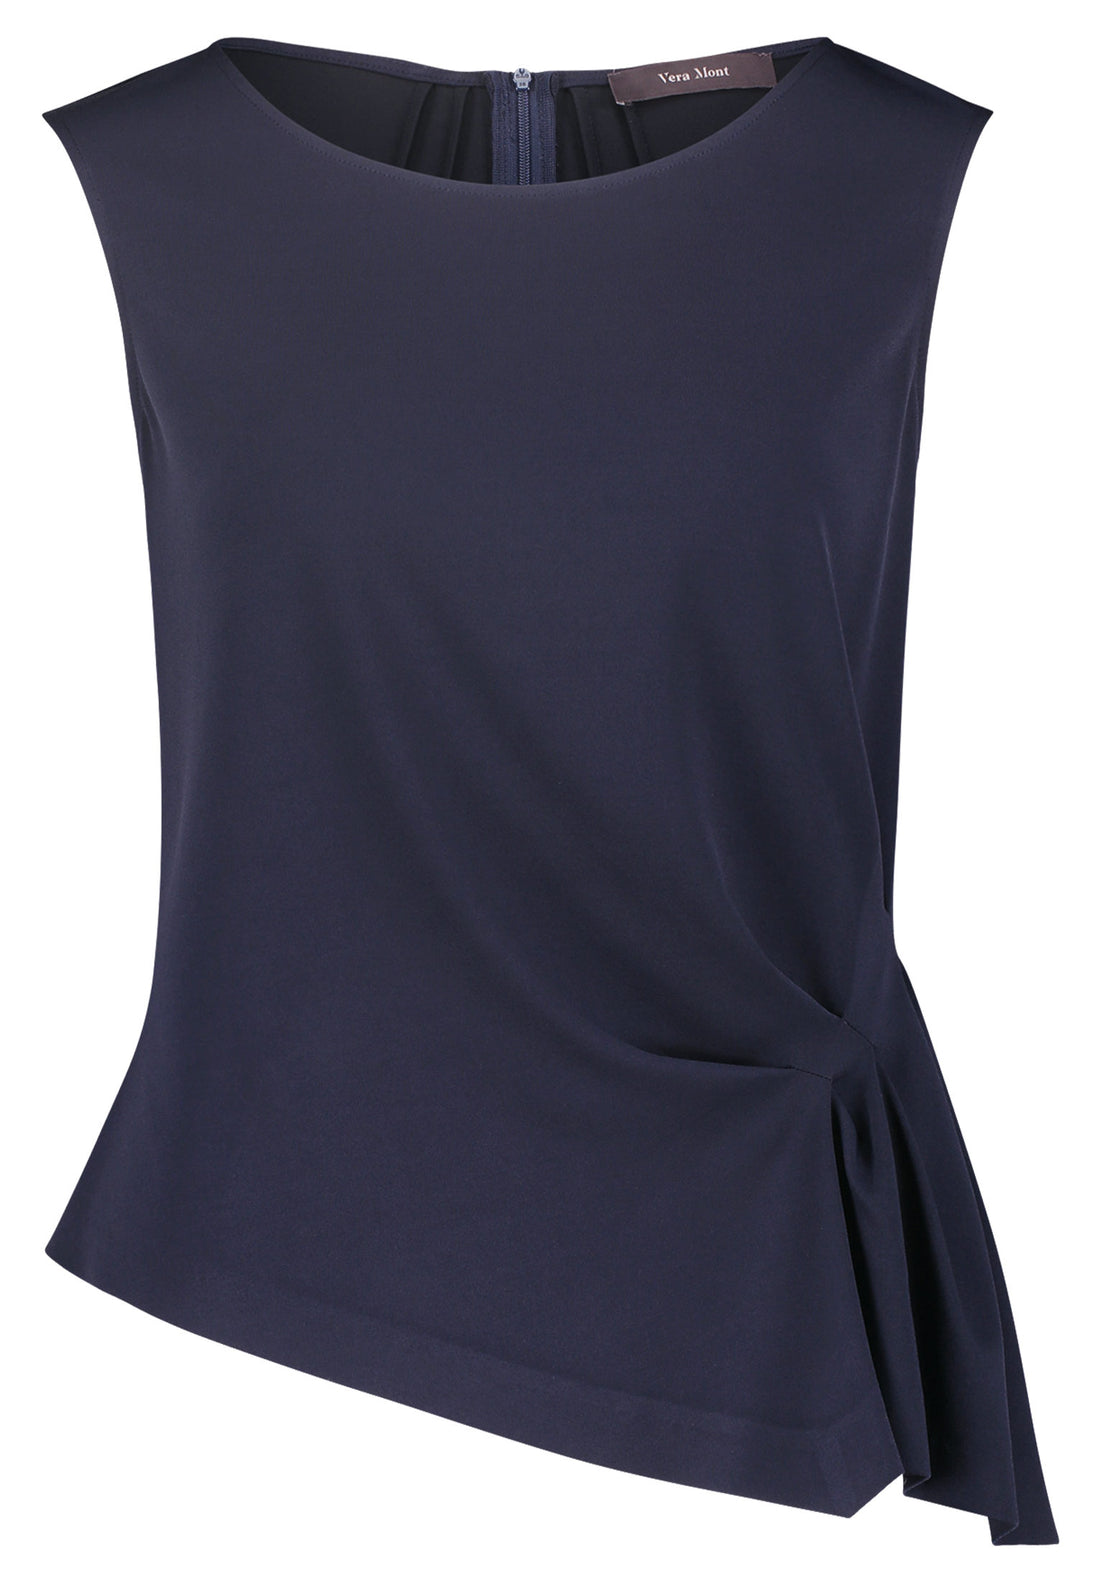 Sleeveless Top With Side Knot_4878 4589_8541_01